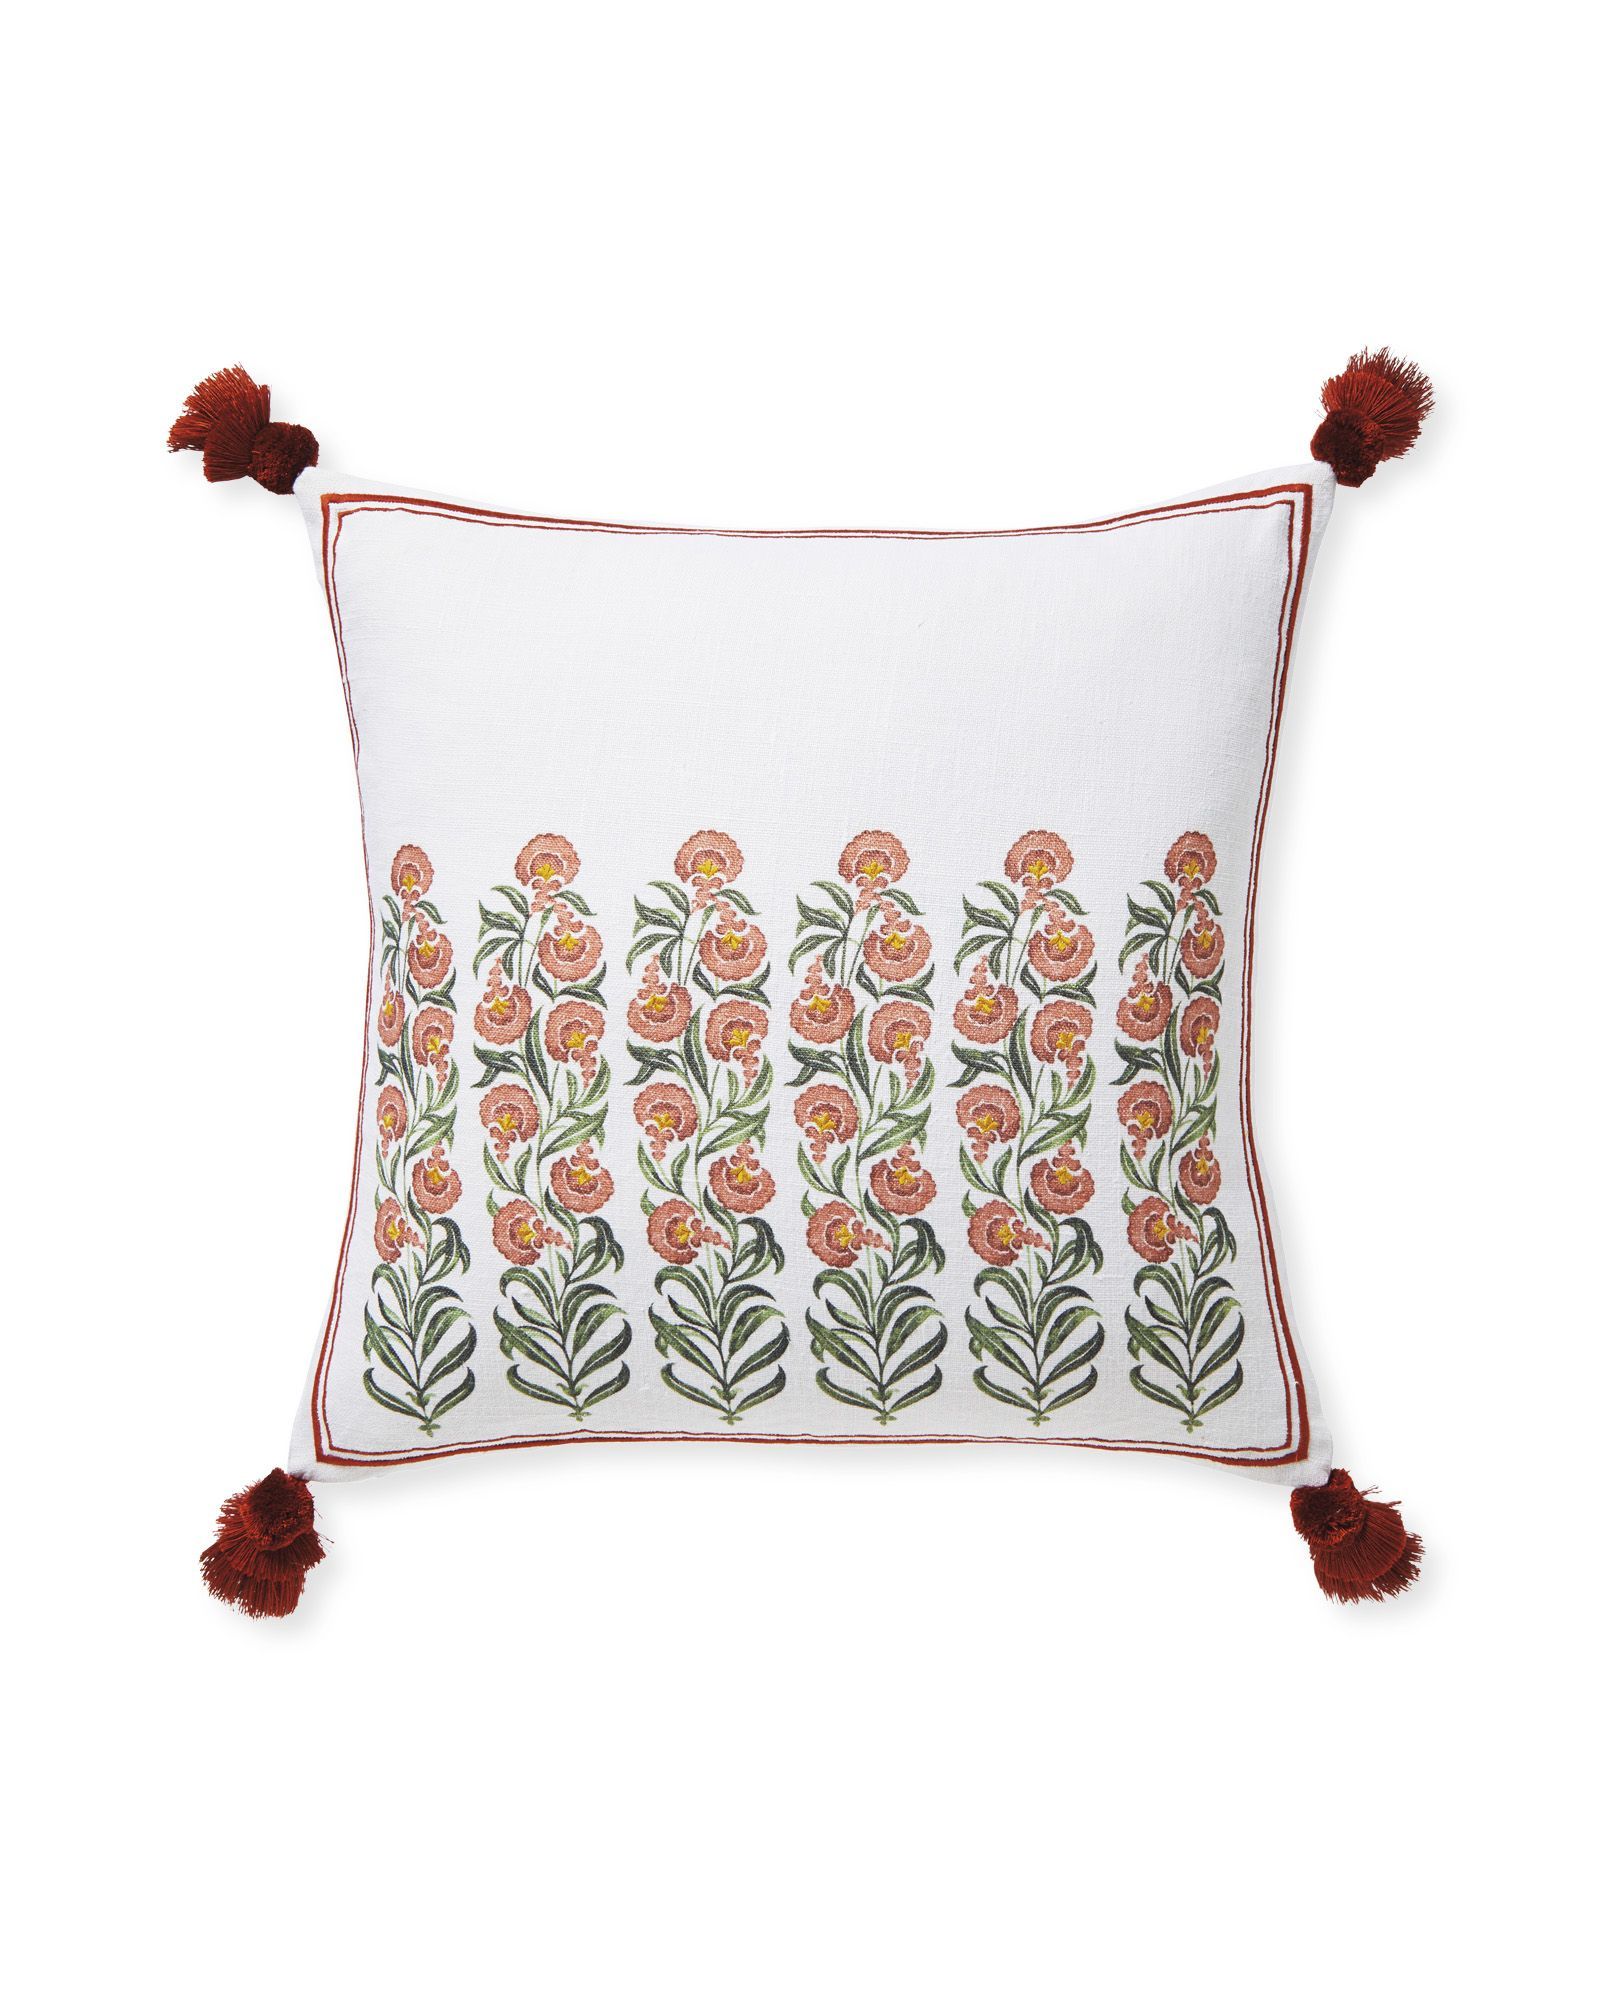 Millwood Pillow Cover